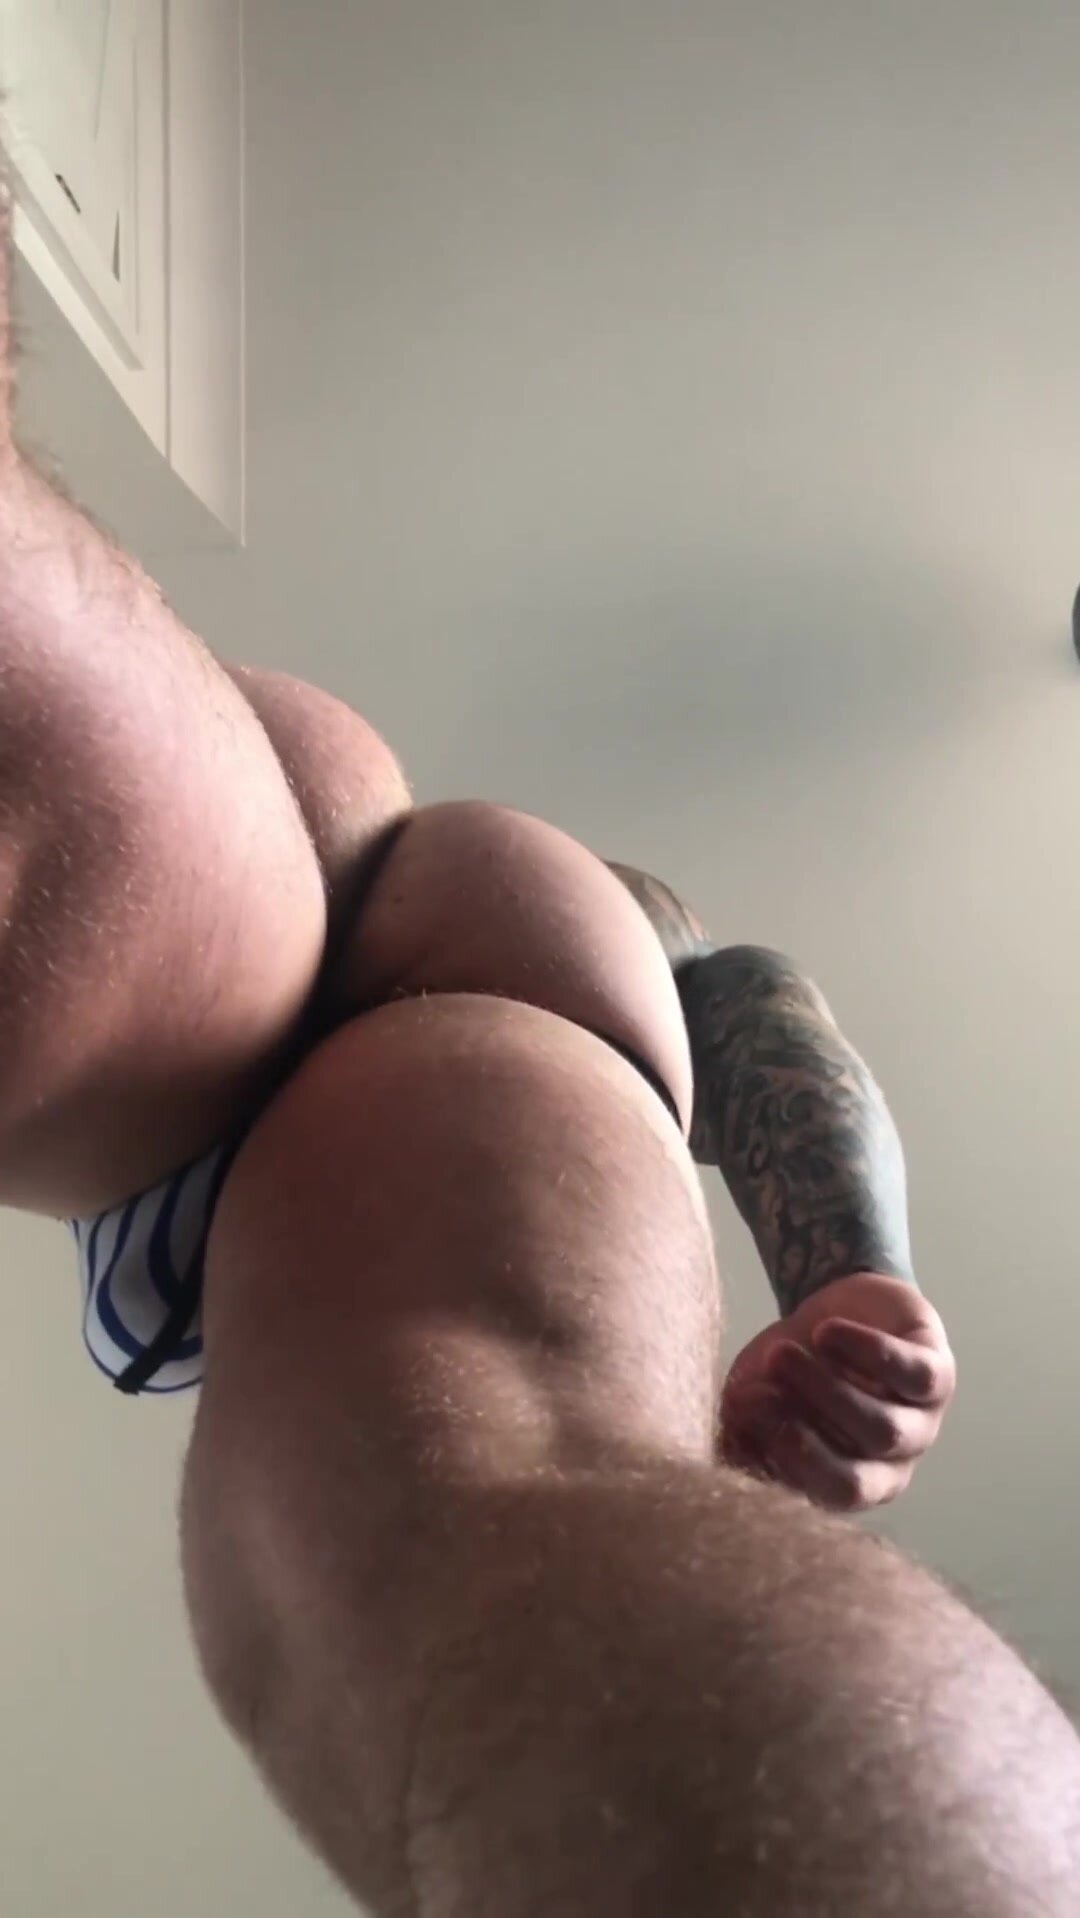 Huge Ass and cock from below